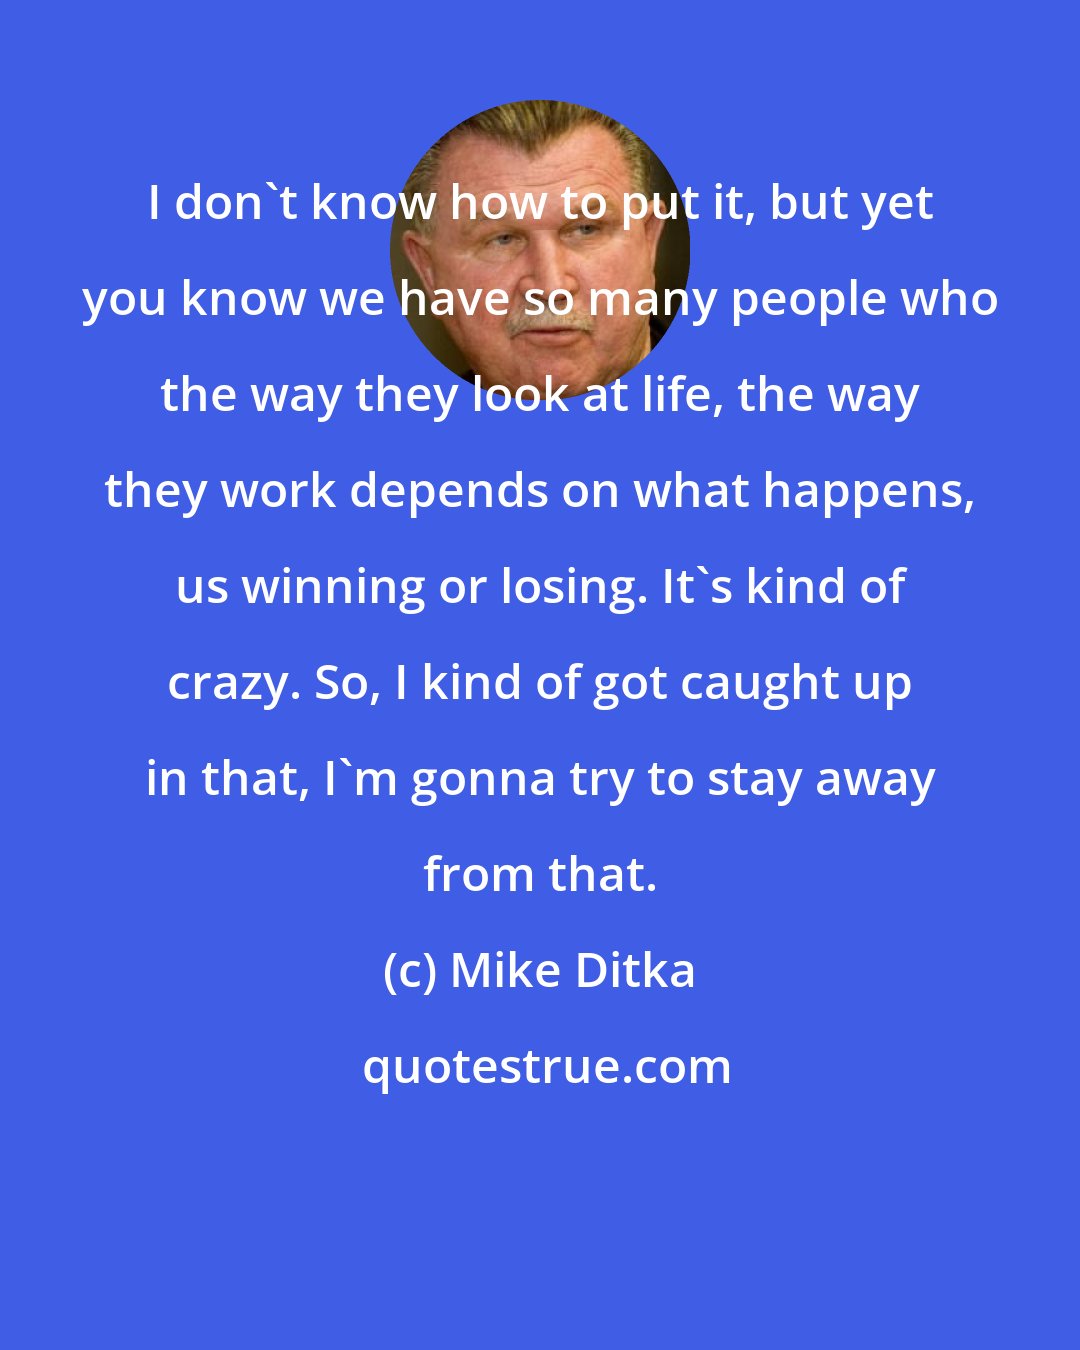 Mike Ditka: I don't know how to put it, but yet you know we have so many people who the way they look at life, the way they work depends on what happens, us winning or losing. It's kind of crazy. So, I kind of got caught up in that, I'm gonna try to stay away from that.